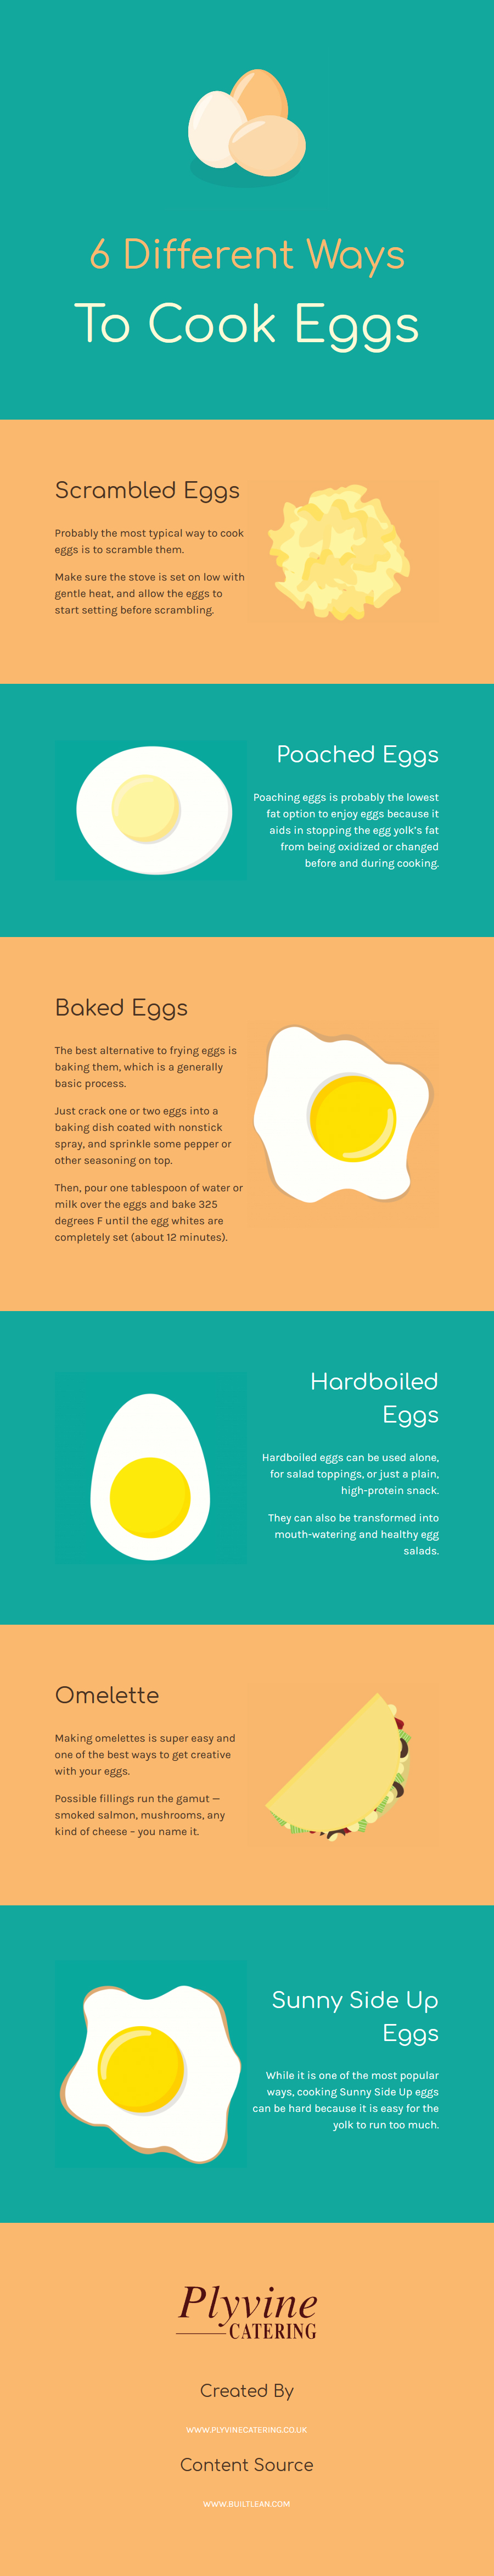 6 Different Ways to Cook Eggs